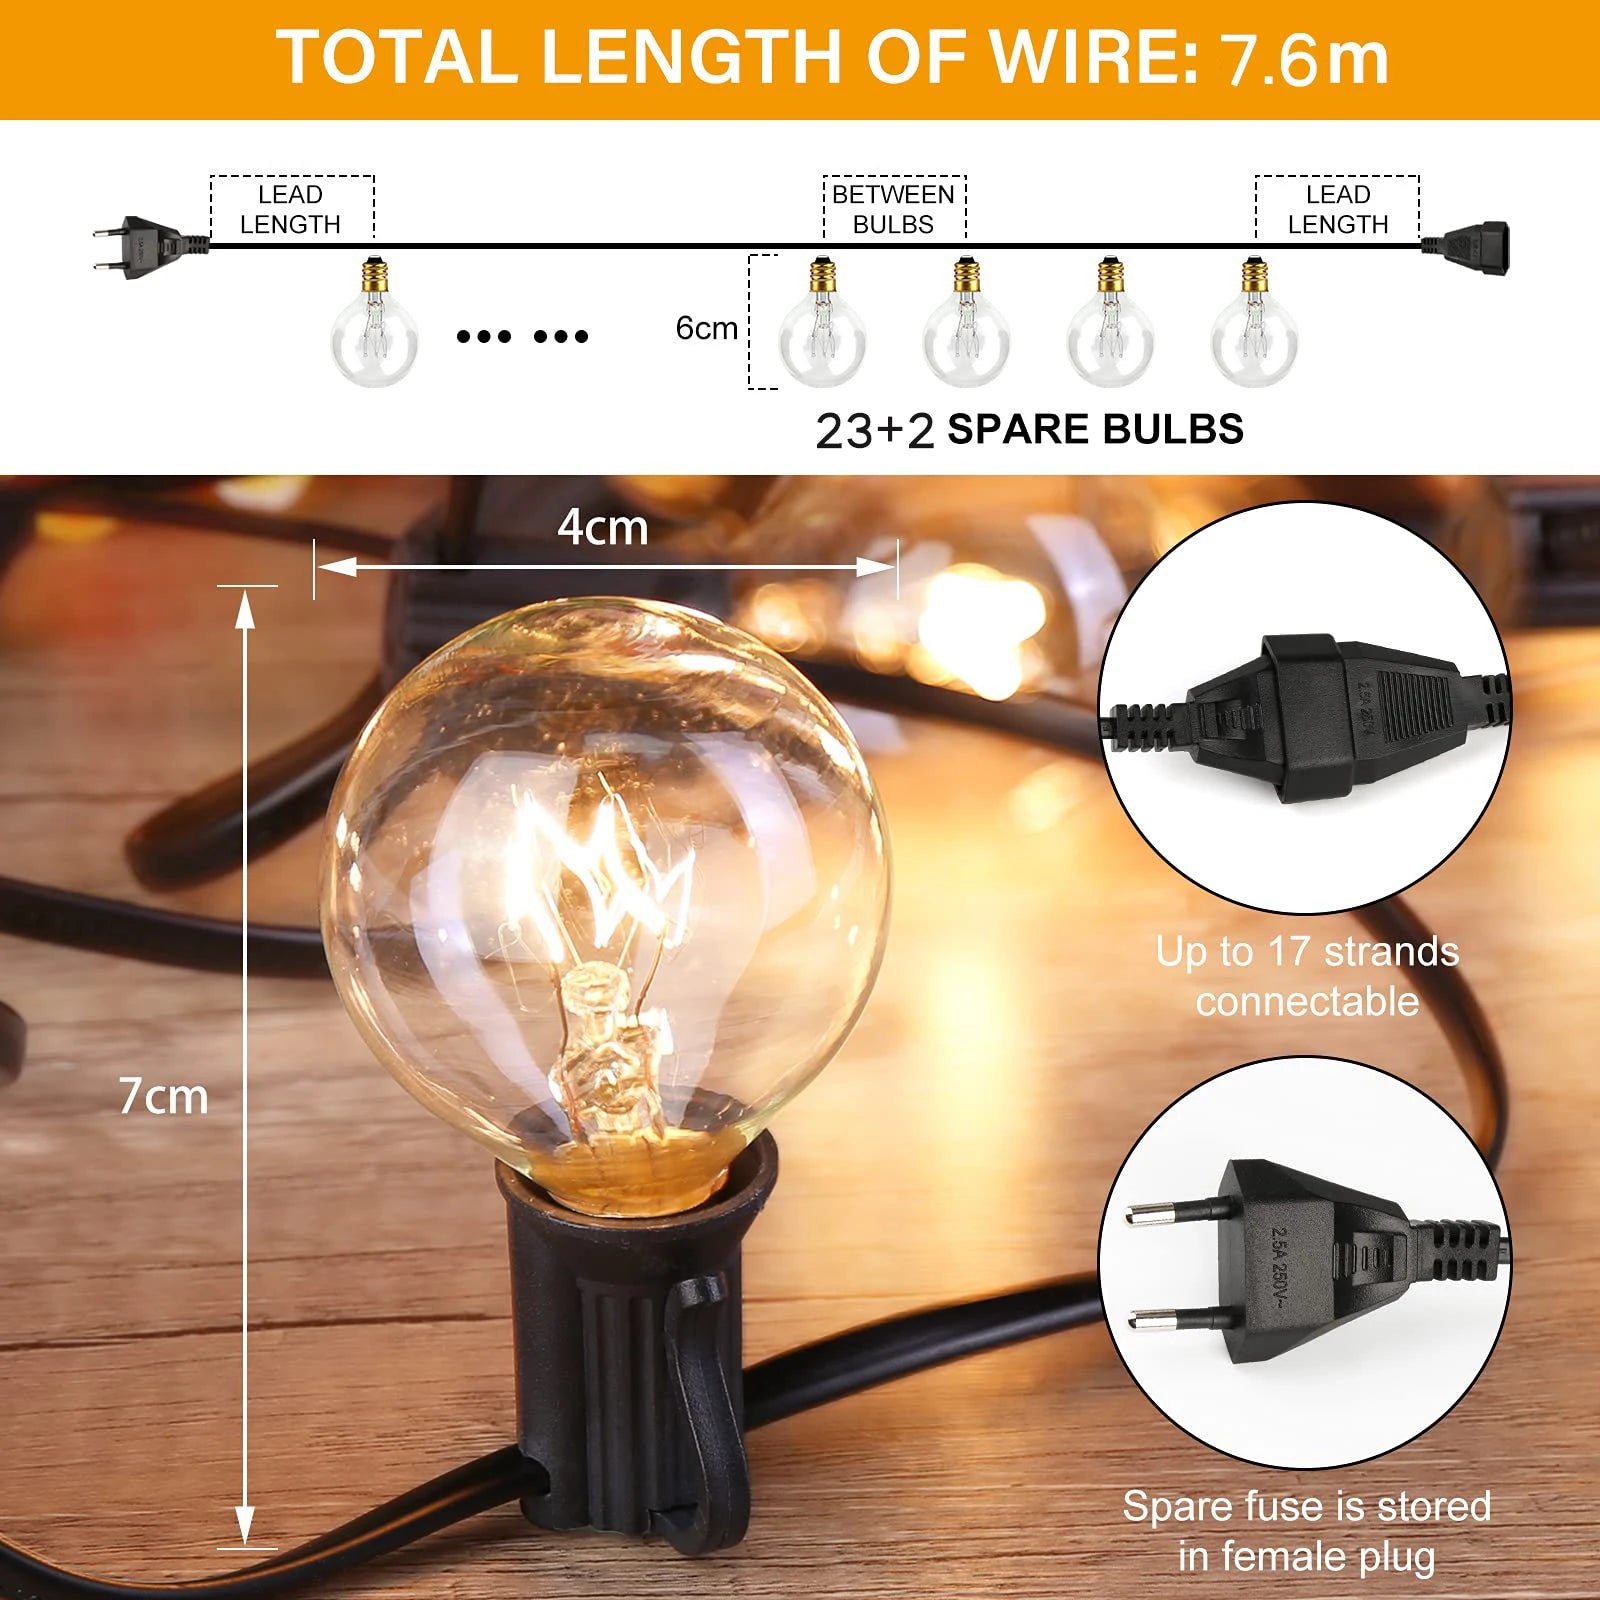 25FT Fairy String Light, Total wire length: 25 feet; 23 bulbs + 2 spares; connect 17 strands; spare fuse in female plug.